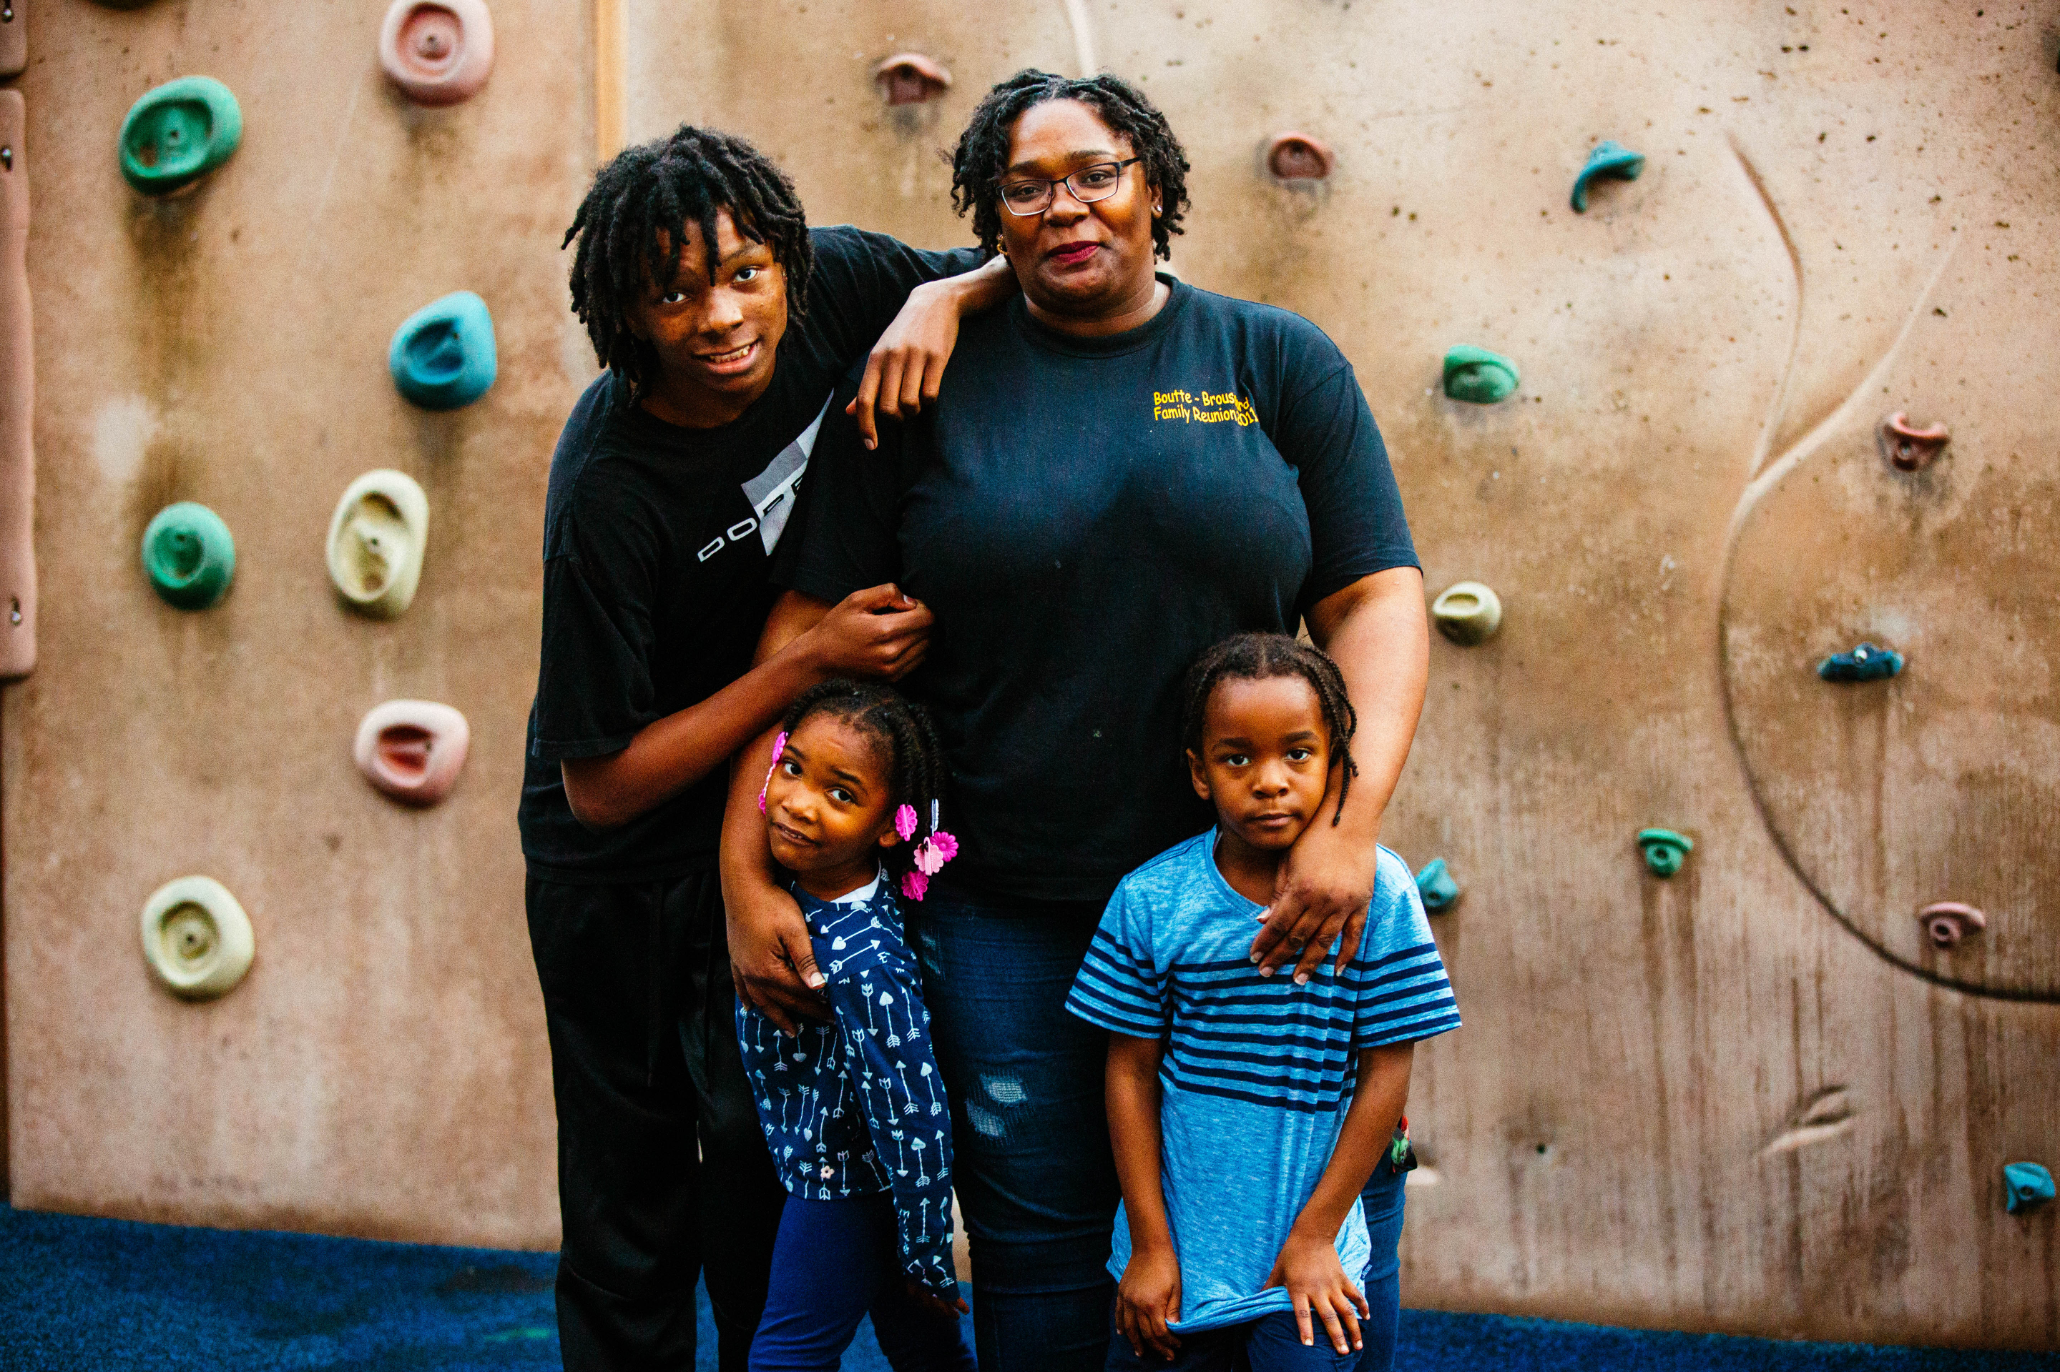 Denise Wilson with her children photographed at Hemmingway Park in Compton on December 5th, 2019. (Chava Sanchez/LAist)